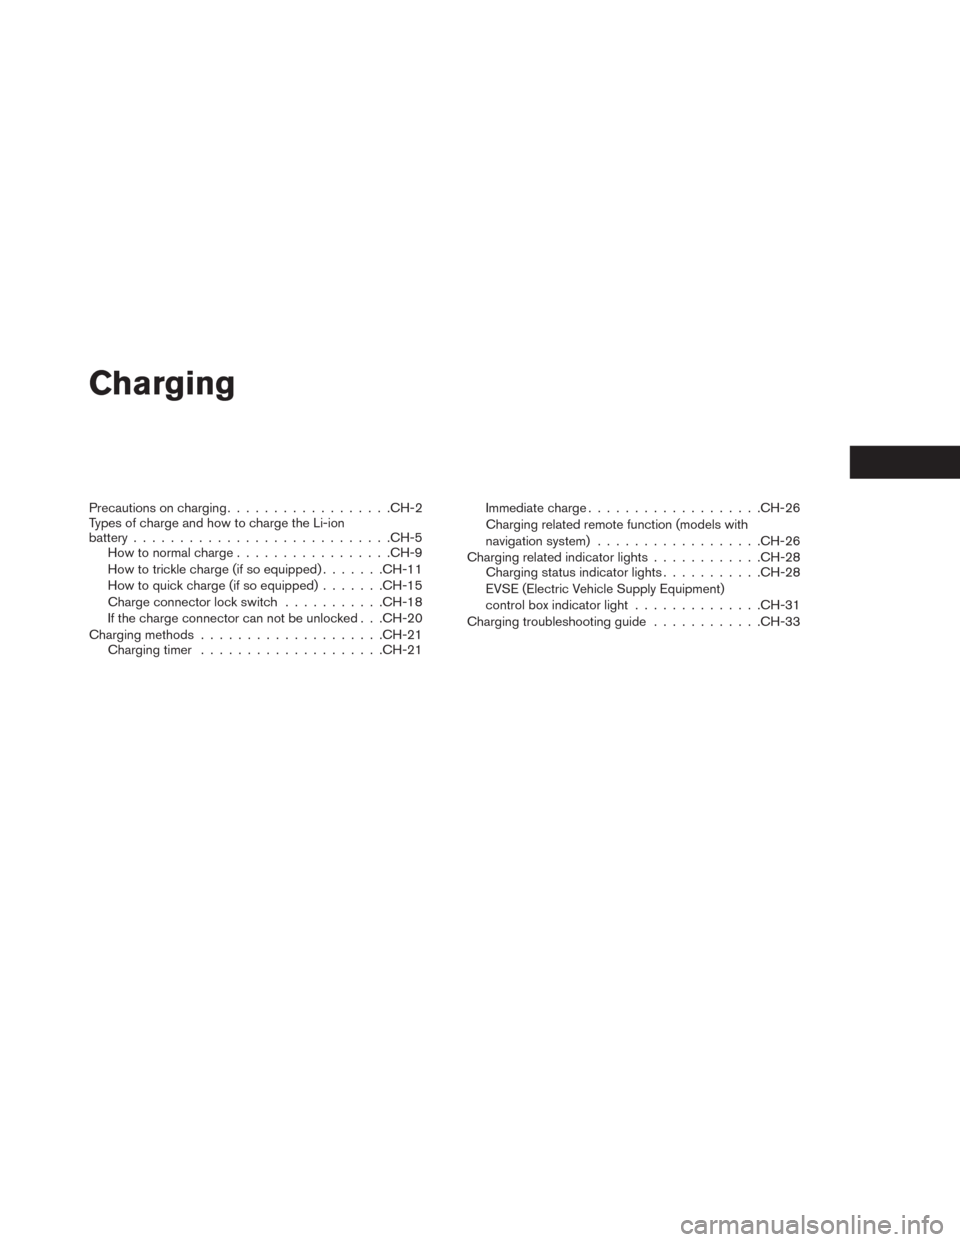 NISSAN LEAF 2014 1.G User Guide Charging
Precautions on charging..................CH-2
Types of charge and how to charge the Li-ion
battery............................CH-5
How to normal charge.................CH-9
How to trickle cha